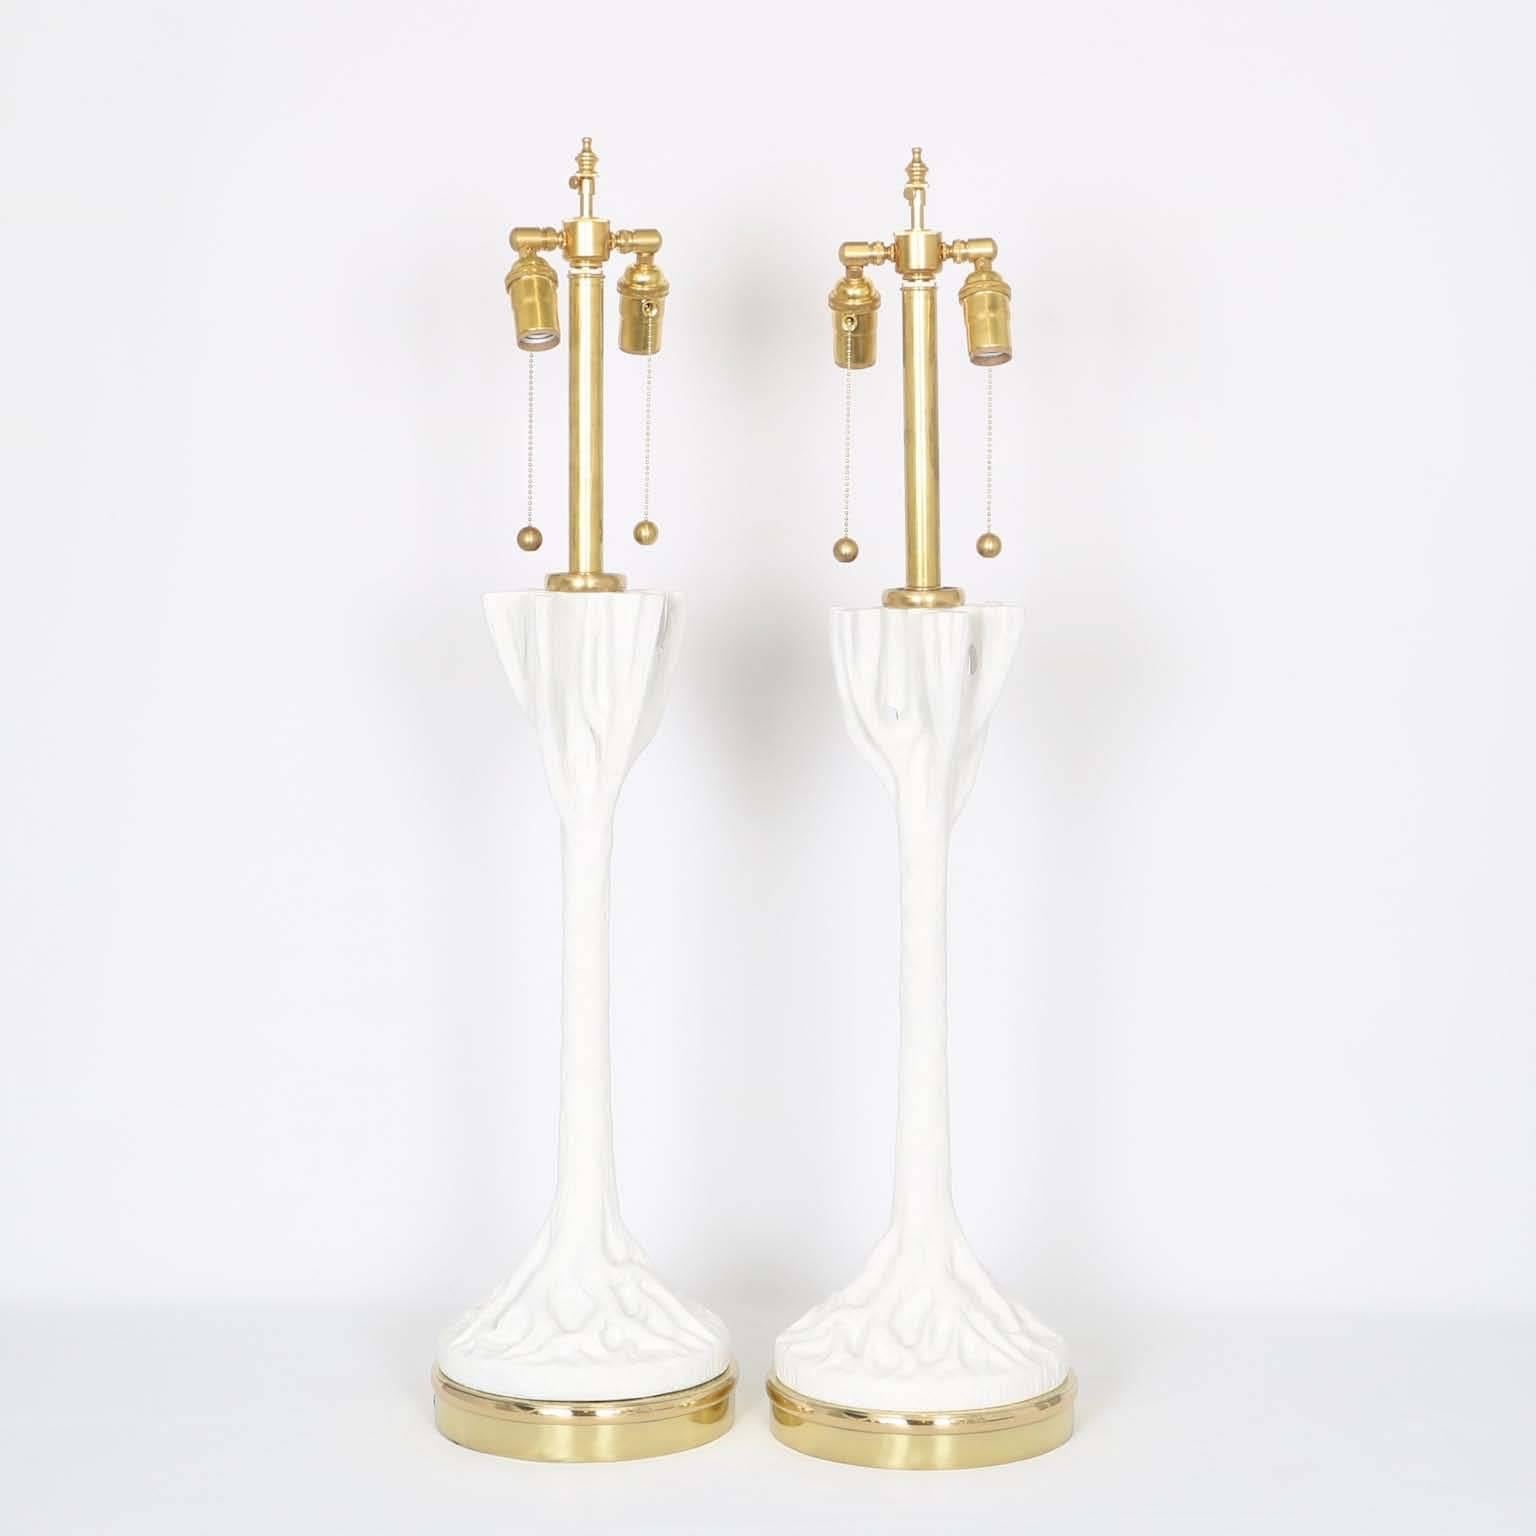 A pair of carved wood faux bois table lamps with plaster finish  in the manner of John Dickinson, produced in the United States, circa 1970s, mounted on brass bases.  The lamps are in excellent vintage condition, fully restored with new wiring and